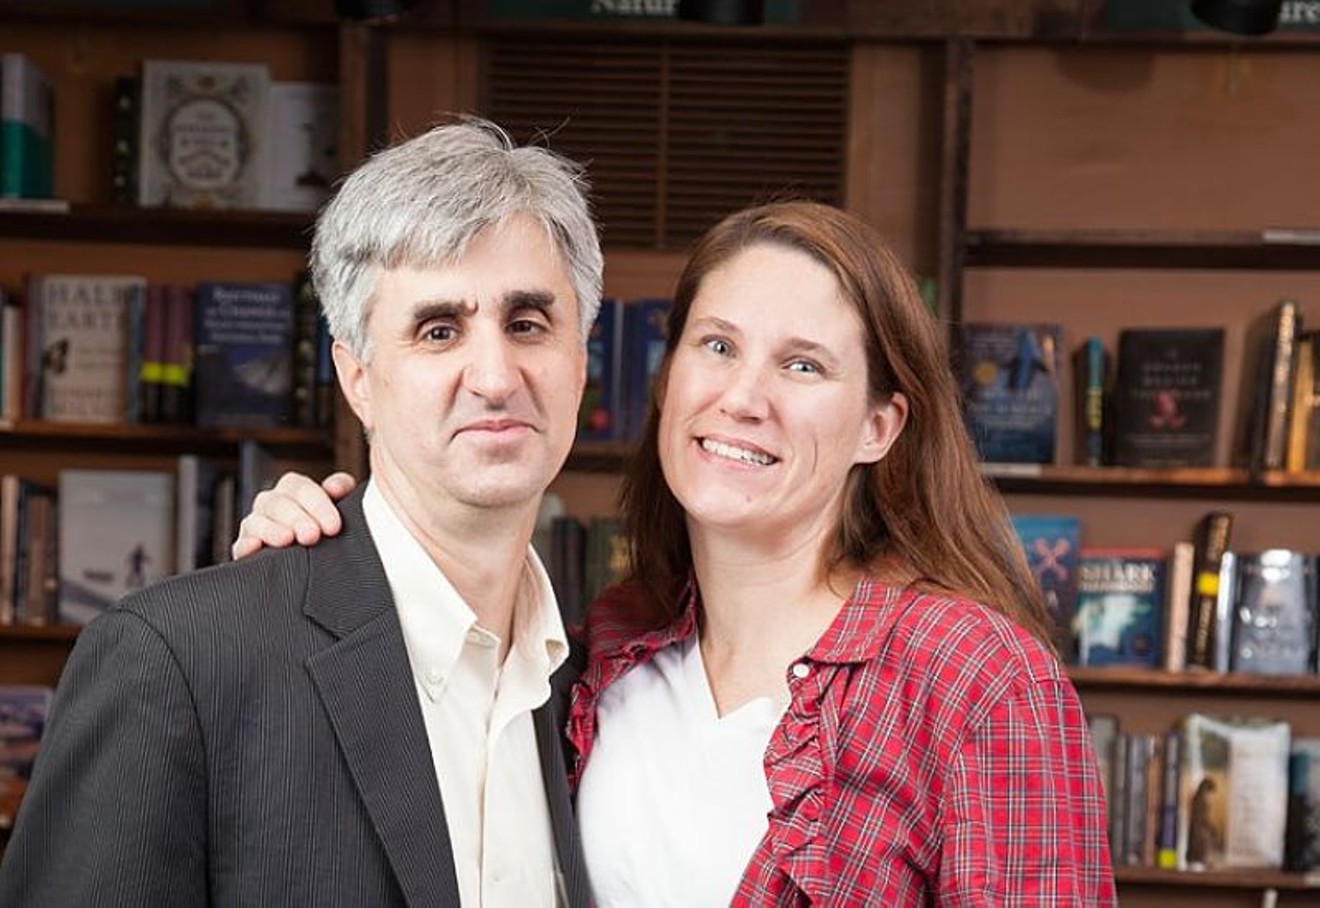 Len Vlahos and Kristen Gilligan, co-owners of the Tattered Cover.